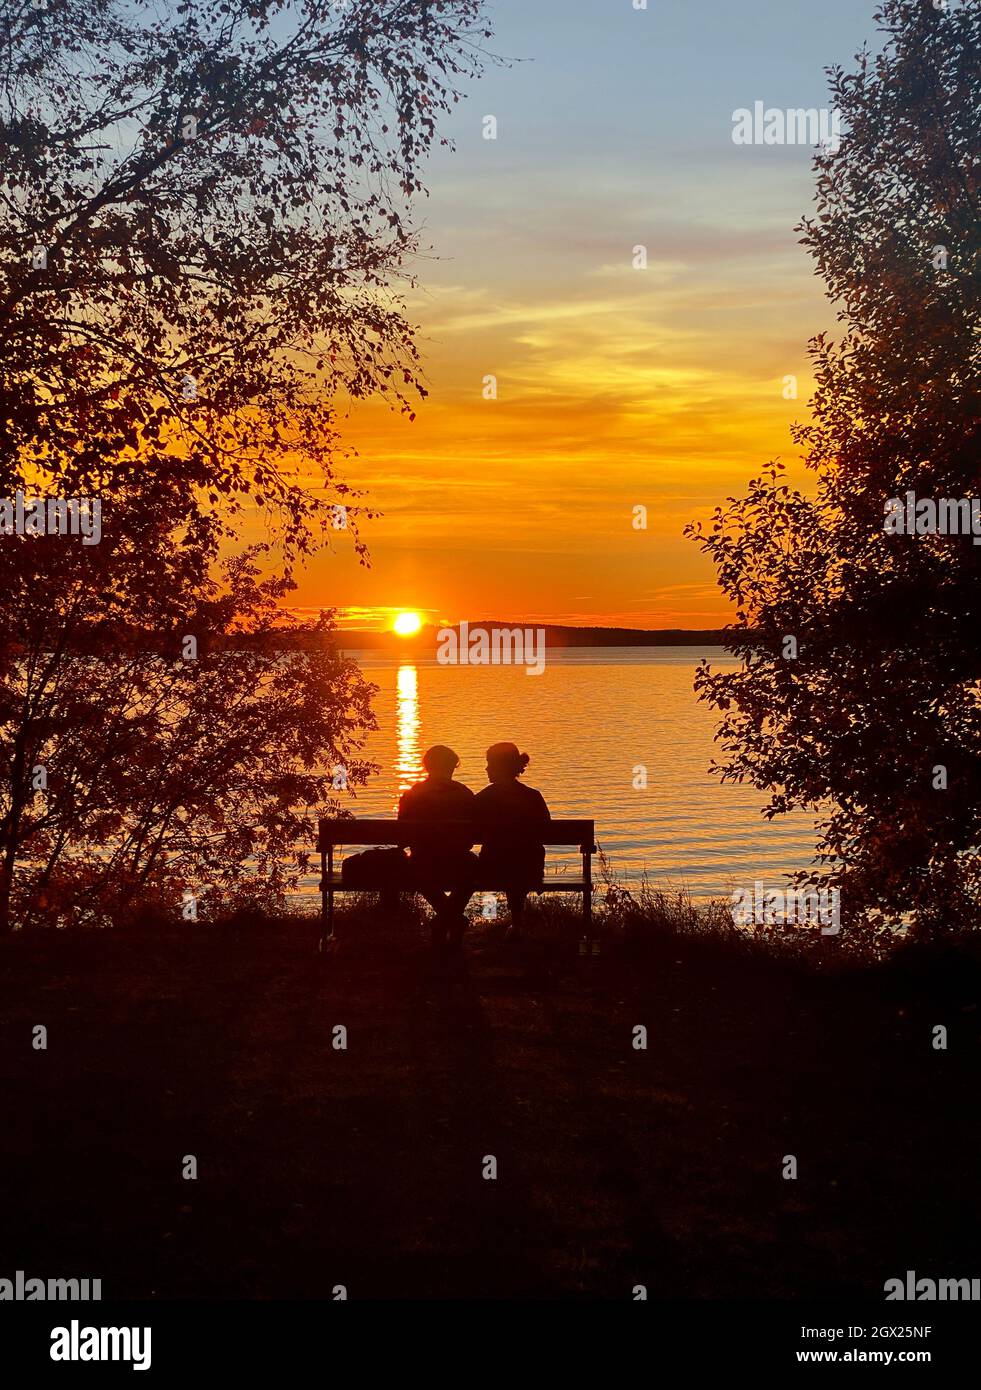 Man and woman sitting on a bench by the lake in beautiful golden summer sunset Stock Photo